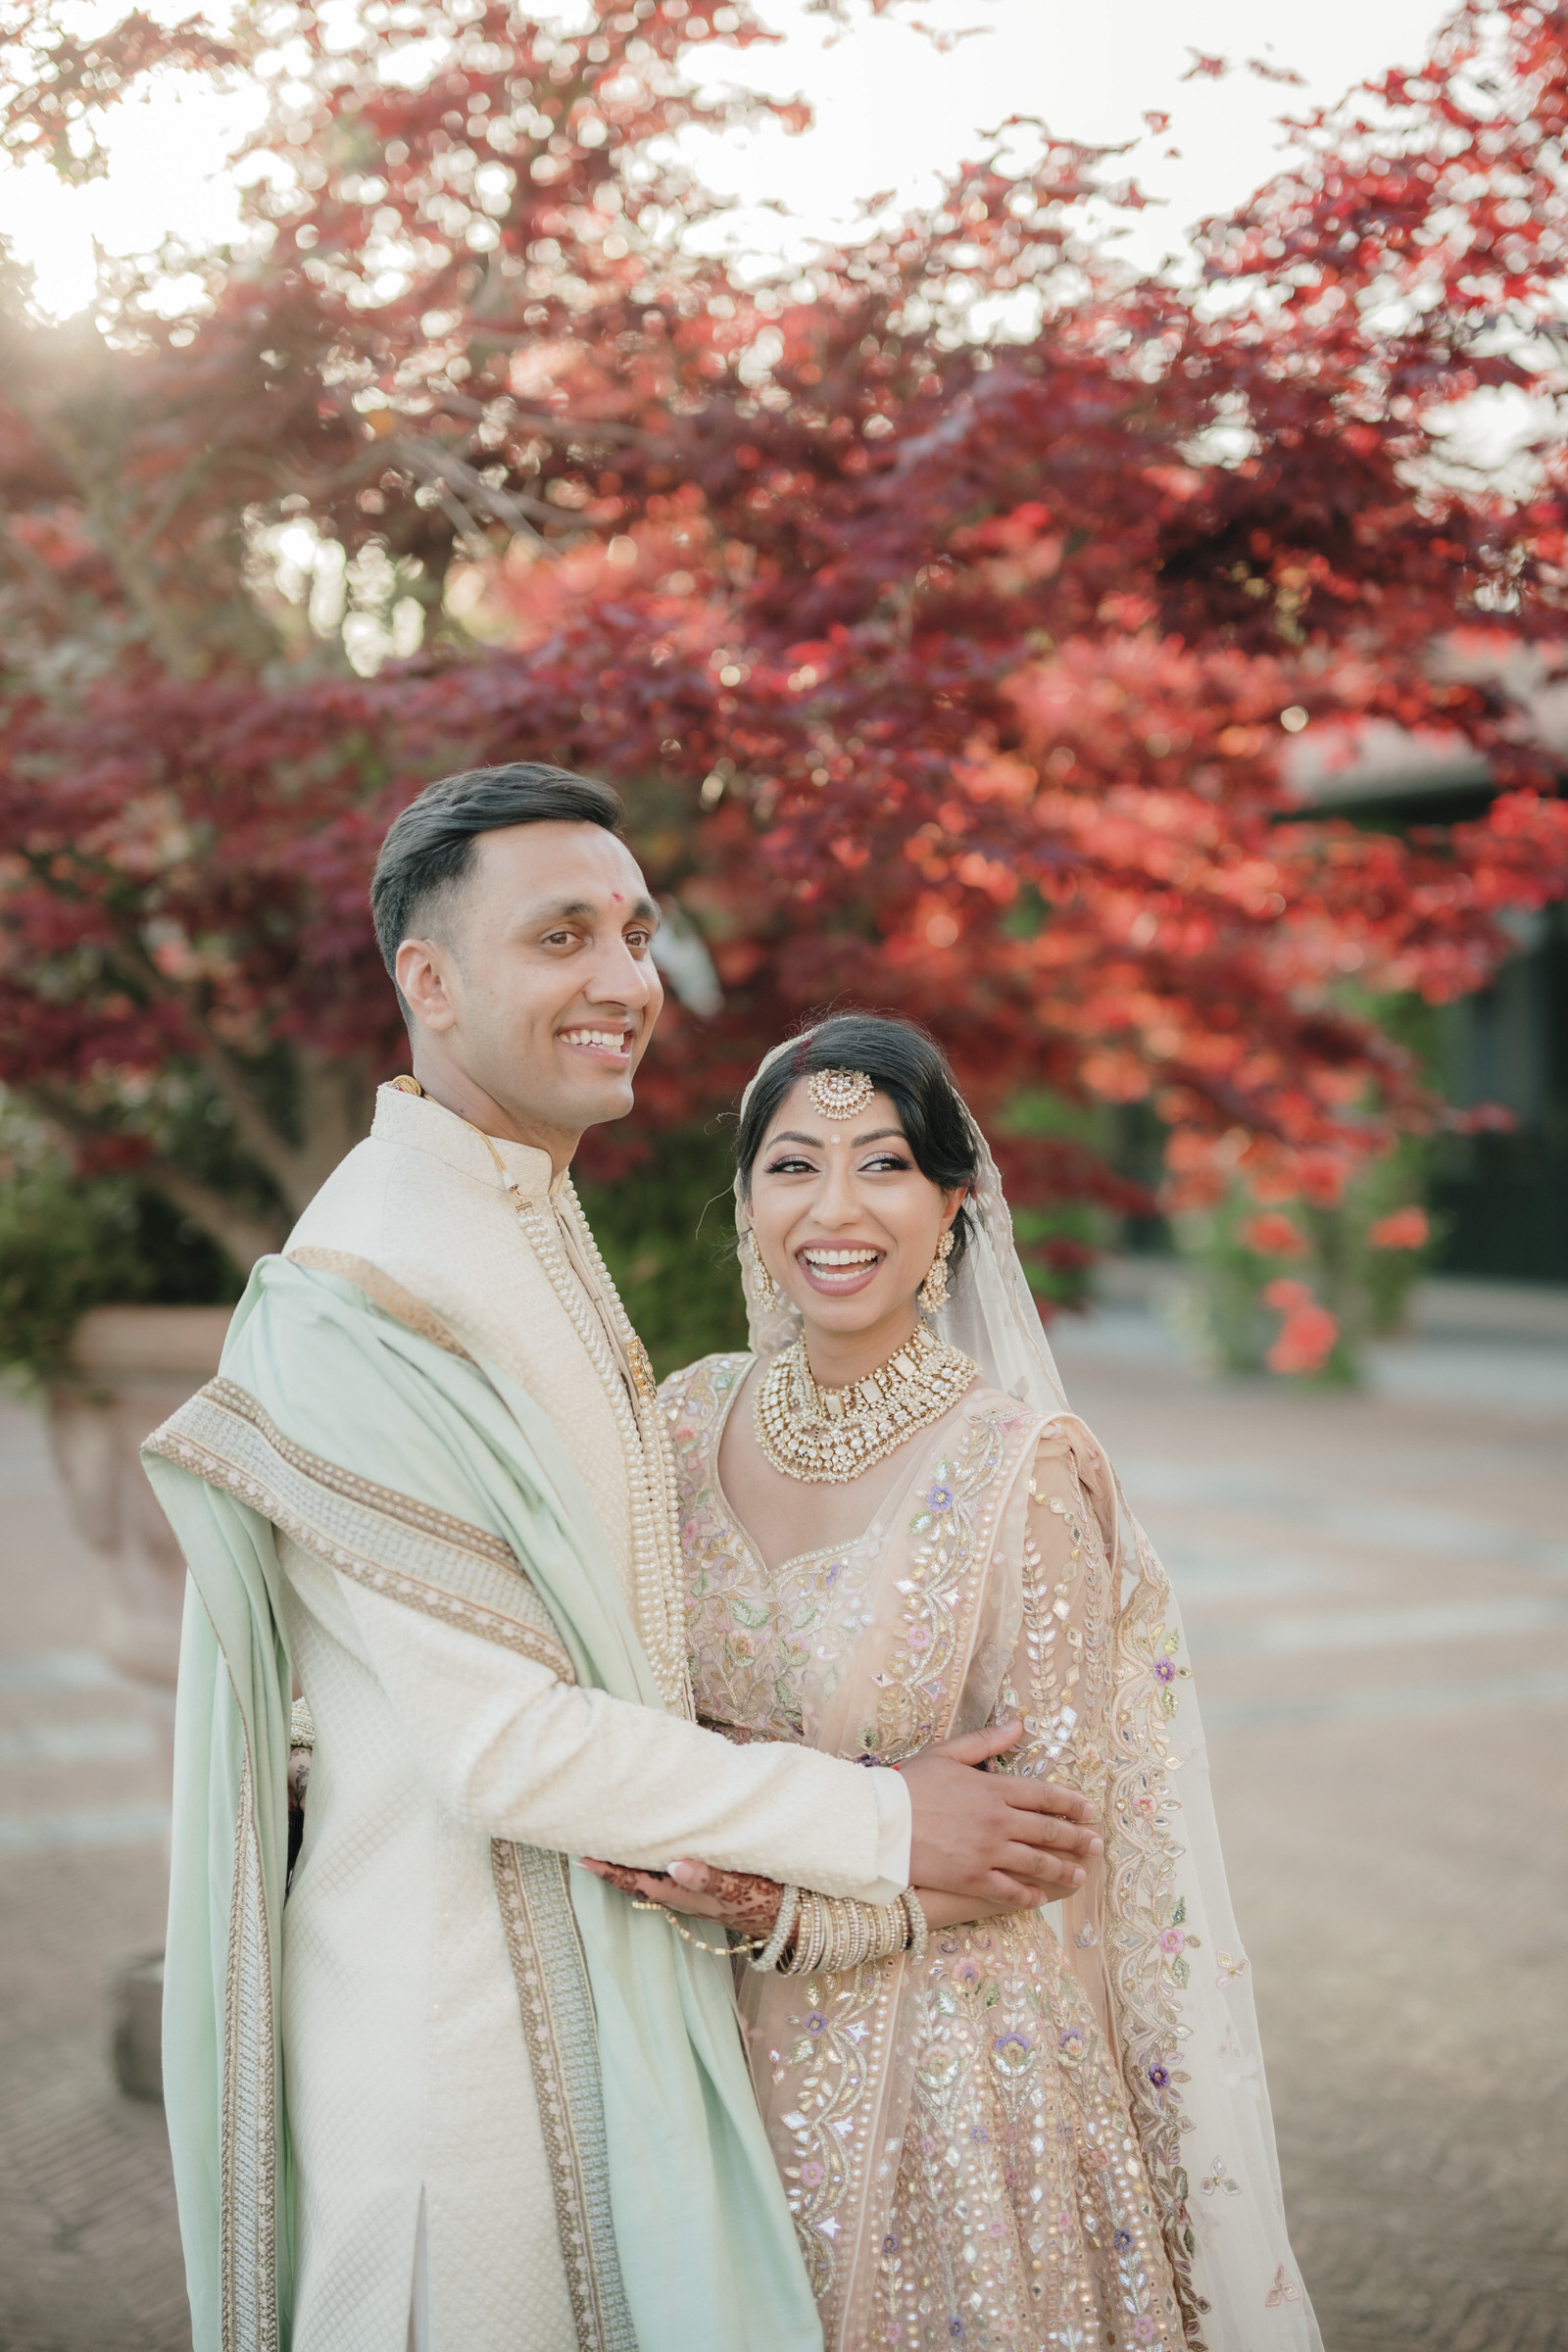 An Elegant Indian-American Wedding in Tuscany With a Multi